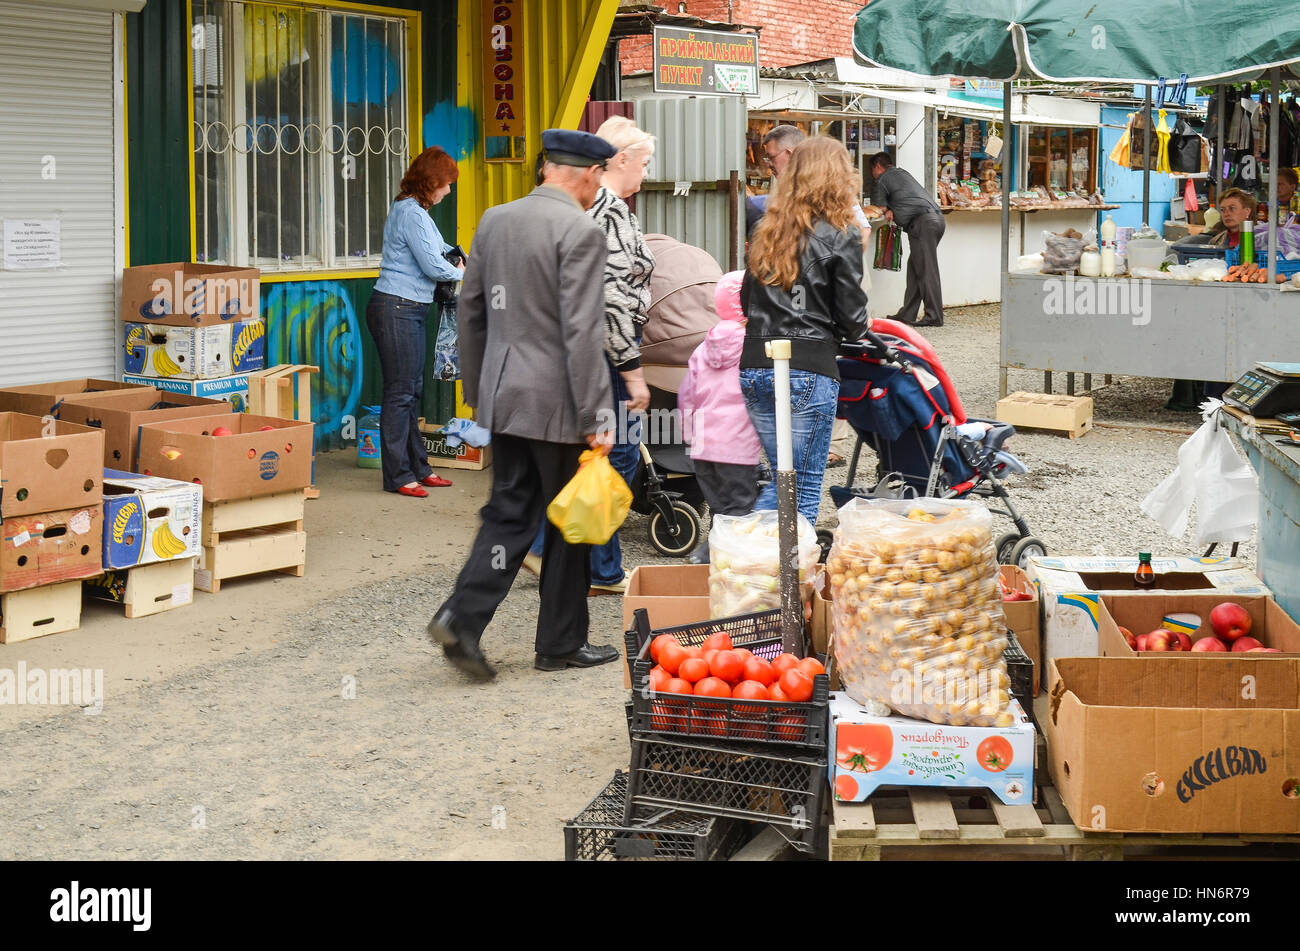 Rivne, Ukraine - May 14, 2013: People at local farmers market or bazaar walking selling and buying fruits and vegetables Stock Photo